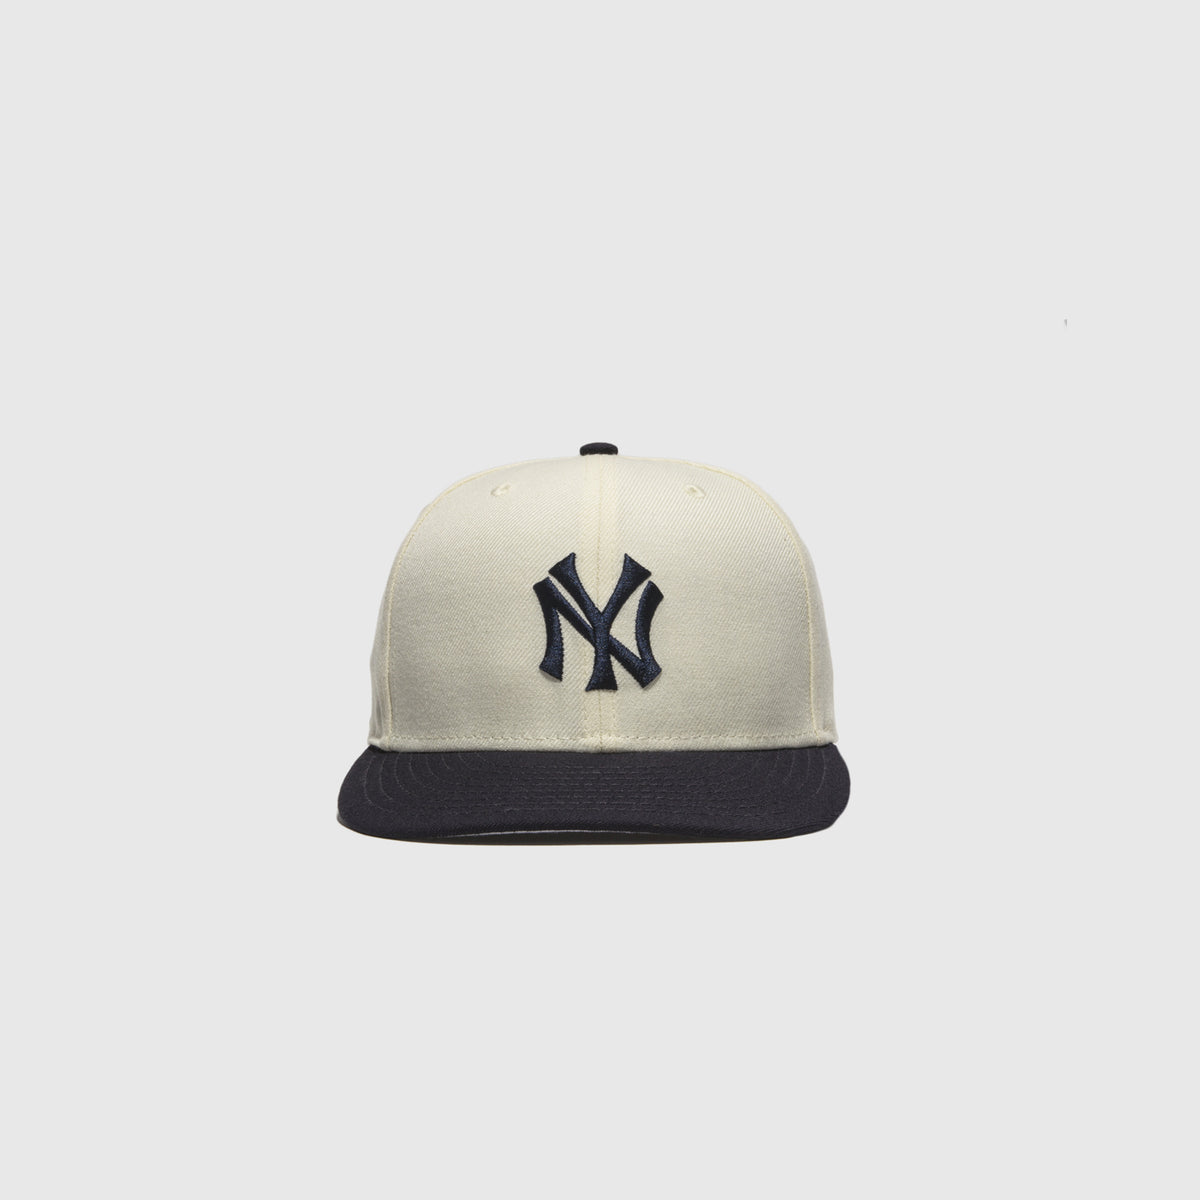 NEW YORK YANKEES 59FIFTY FITTED SAKURA X PACKER – PACKER SHOES